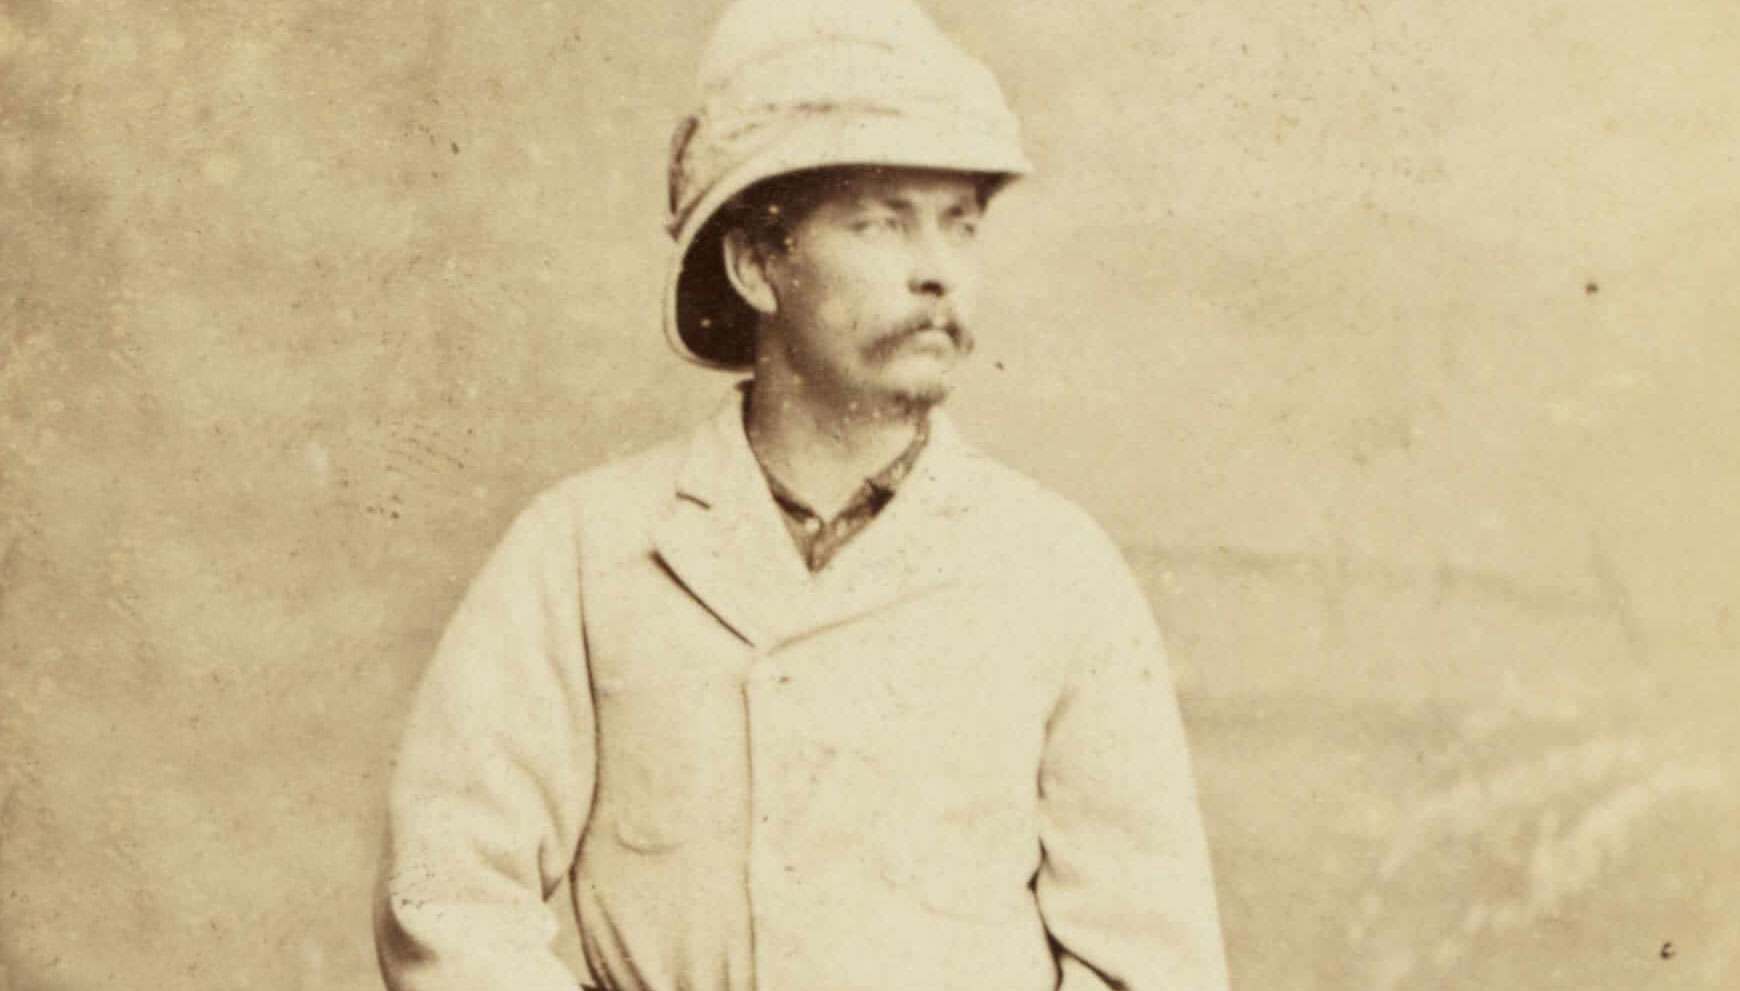 Henry Morton Stanley wearing a explorer hat and a Cordings linen shirt in a warm country